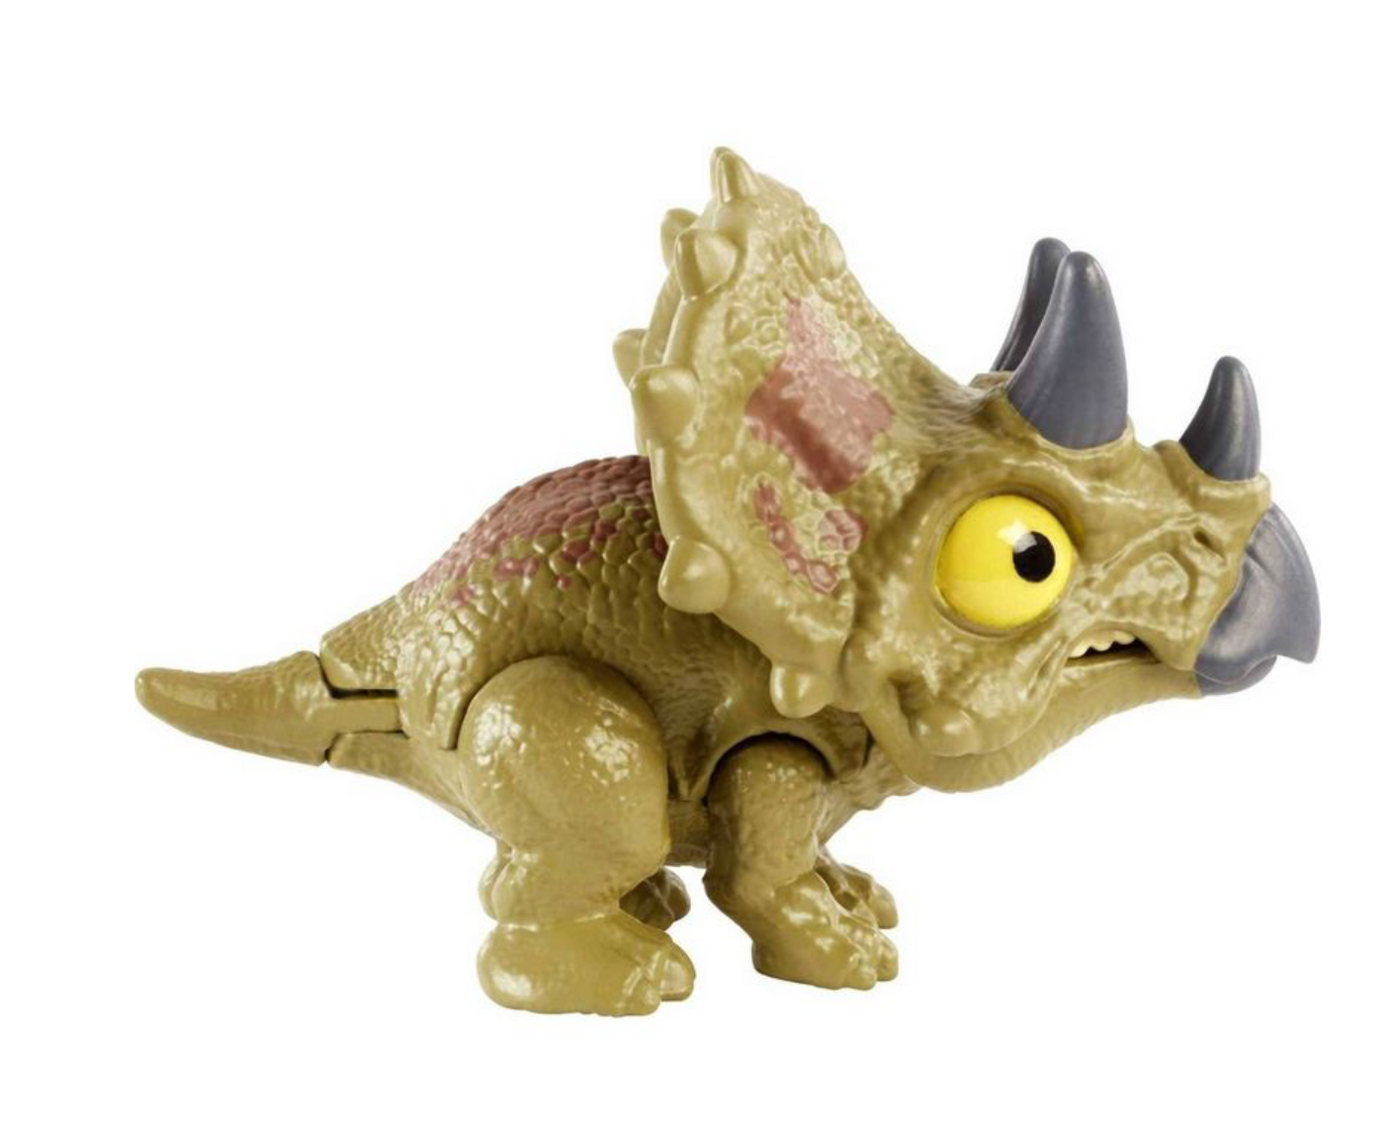 Jurassic World Snap Squad Attitudes Triceratops Dinosaurs Toy New With Box